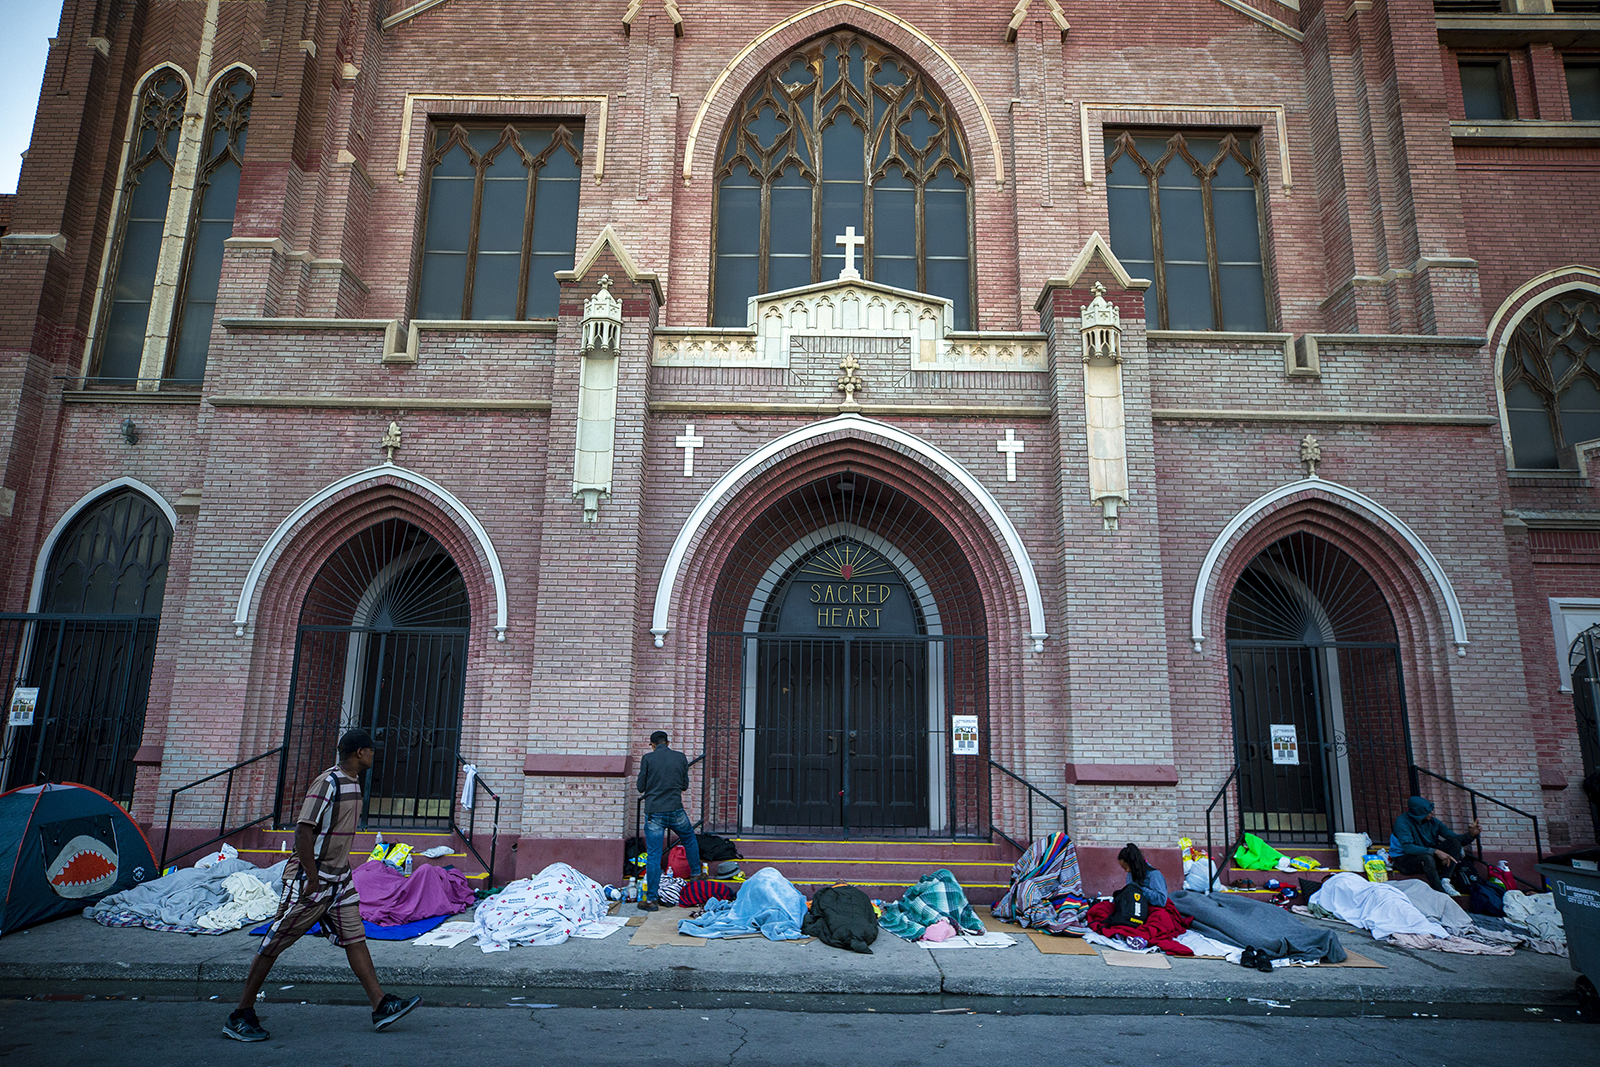 Migrants wake up at the sidewalk outside Sacred Heart Church in downtown El Paso, Texas, on Tuesday, May 9, 2023. As confusion over border rules explodes in El Paso, one of the busiest illegal crossing points for migrants seeking to flee poverty and political strife, faith leaders continue to provide shelter, legal advice and prayer. (AP Photo/Andres Leighton)